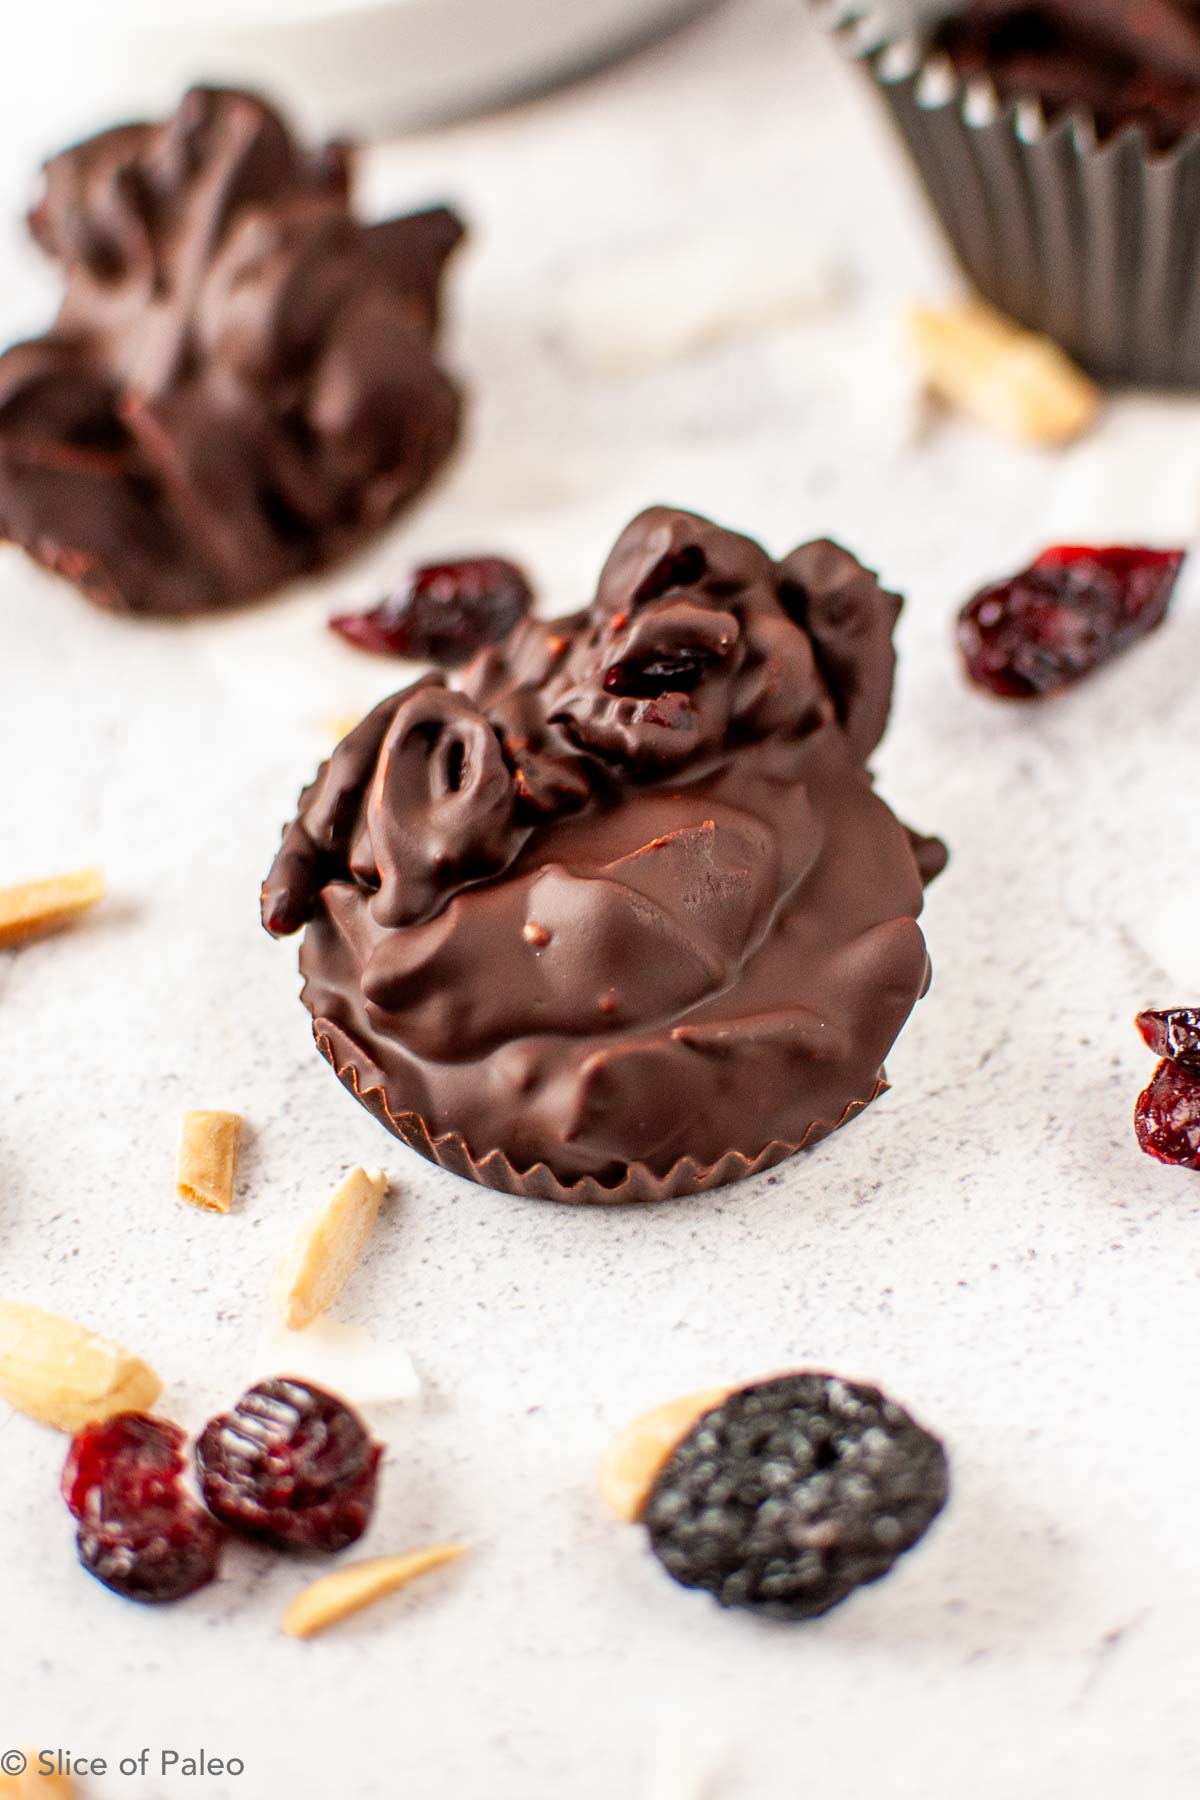 Paleo chocolate cluster surrounded by dried fruit and nuts.